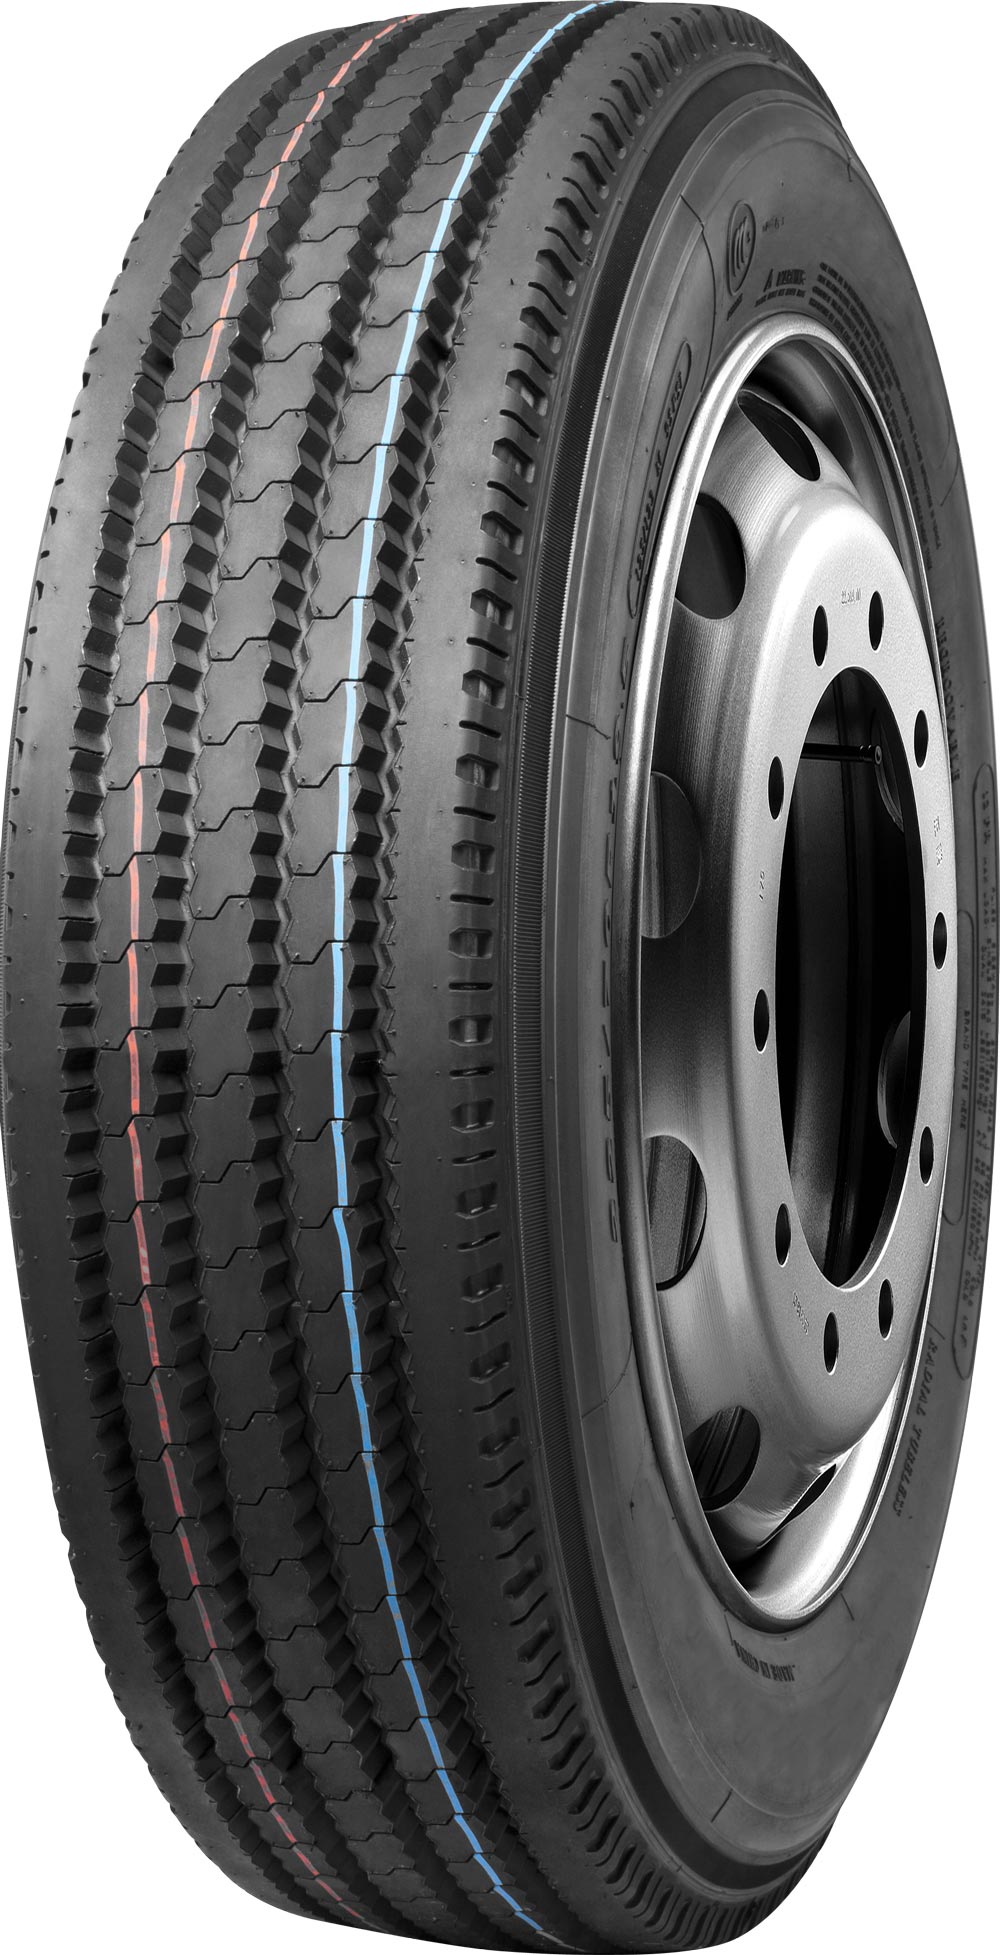 product_type-heavy_tires Barkley BL207 18 TL 275/70 R22.5 150M